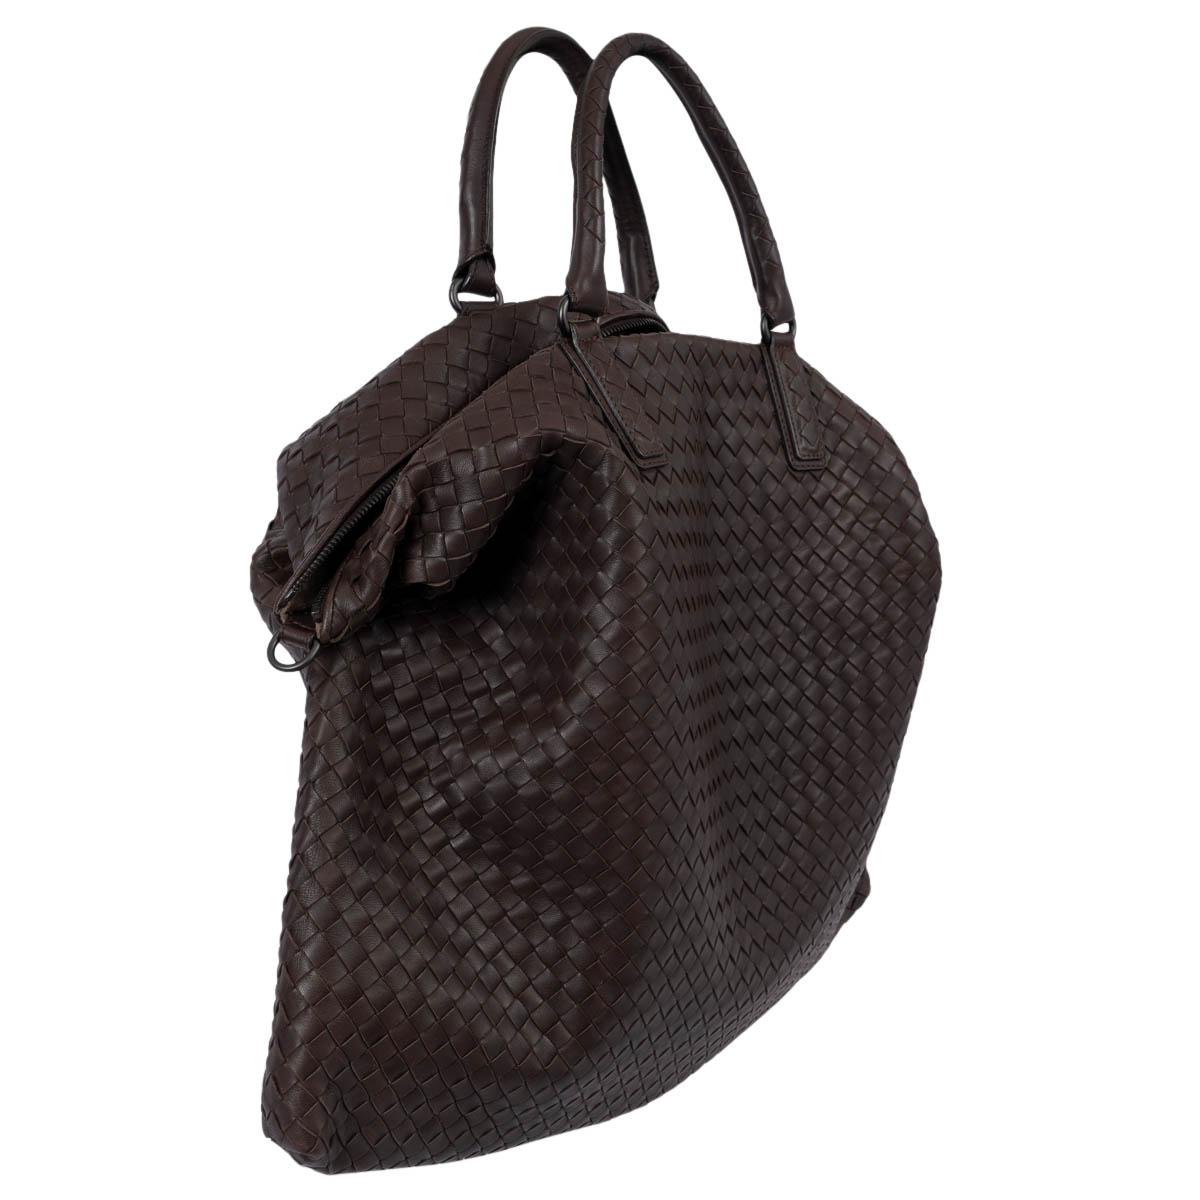 100% authentic Bottega Veneta Maxi Convertible tote in Ebano brown Intrecciato Nappa leather. Opens with a zipper on top to a brown suede lined interior with one zipper pocket against the back. Has been carried and is in excellent condition. Comes